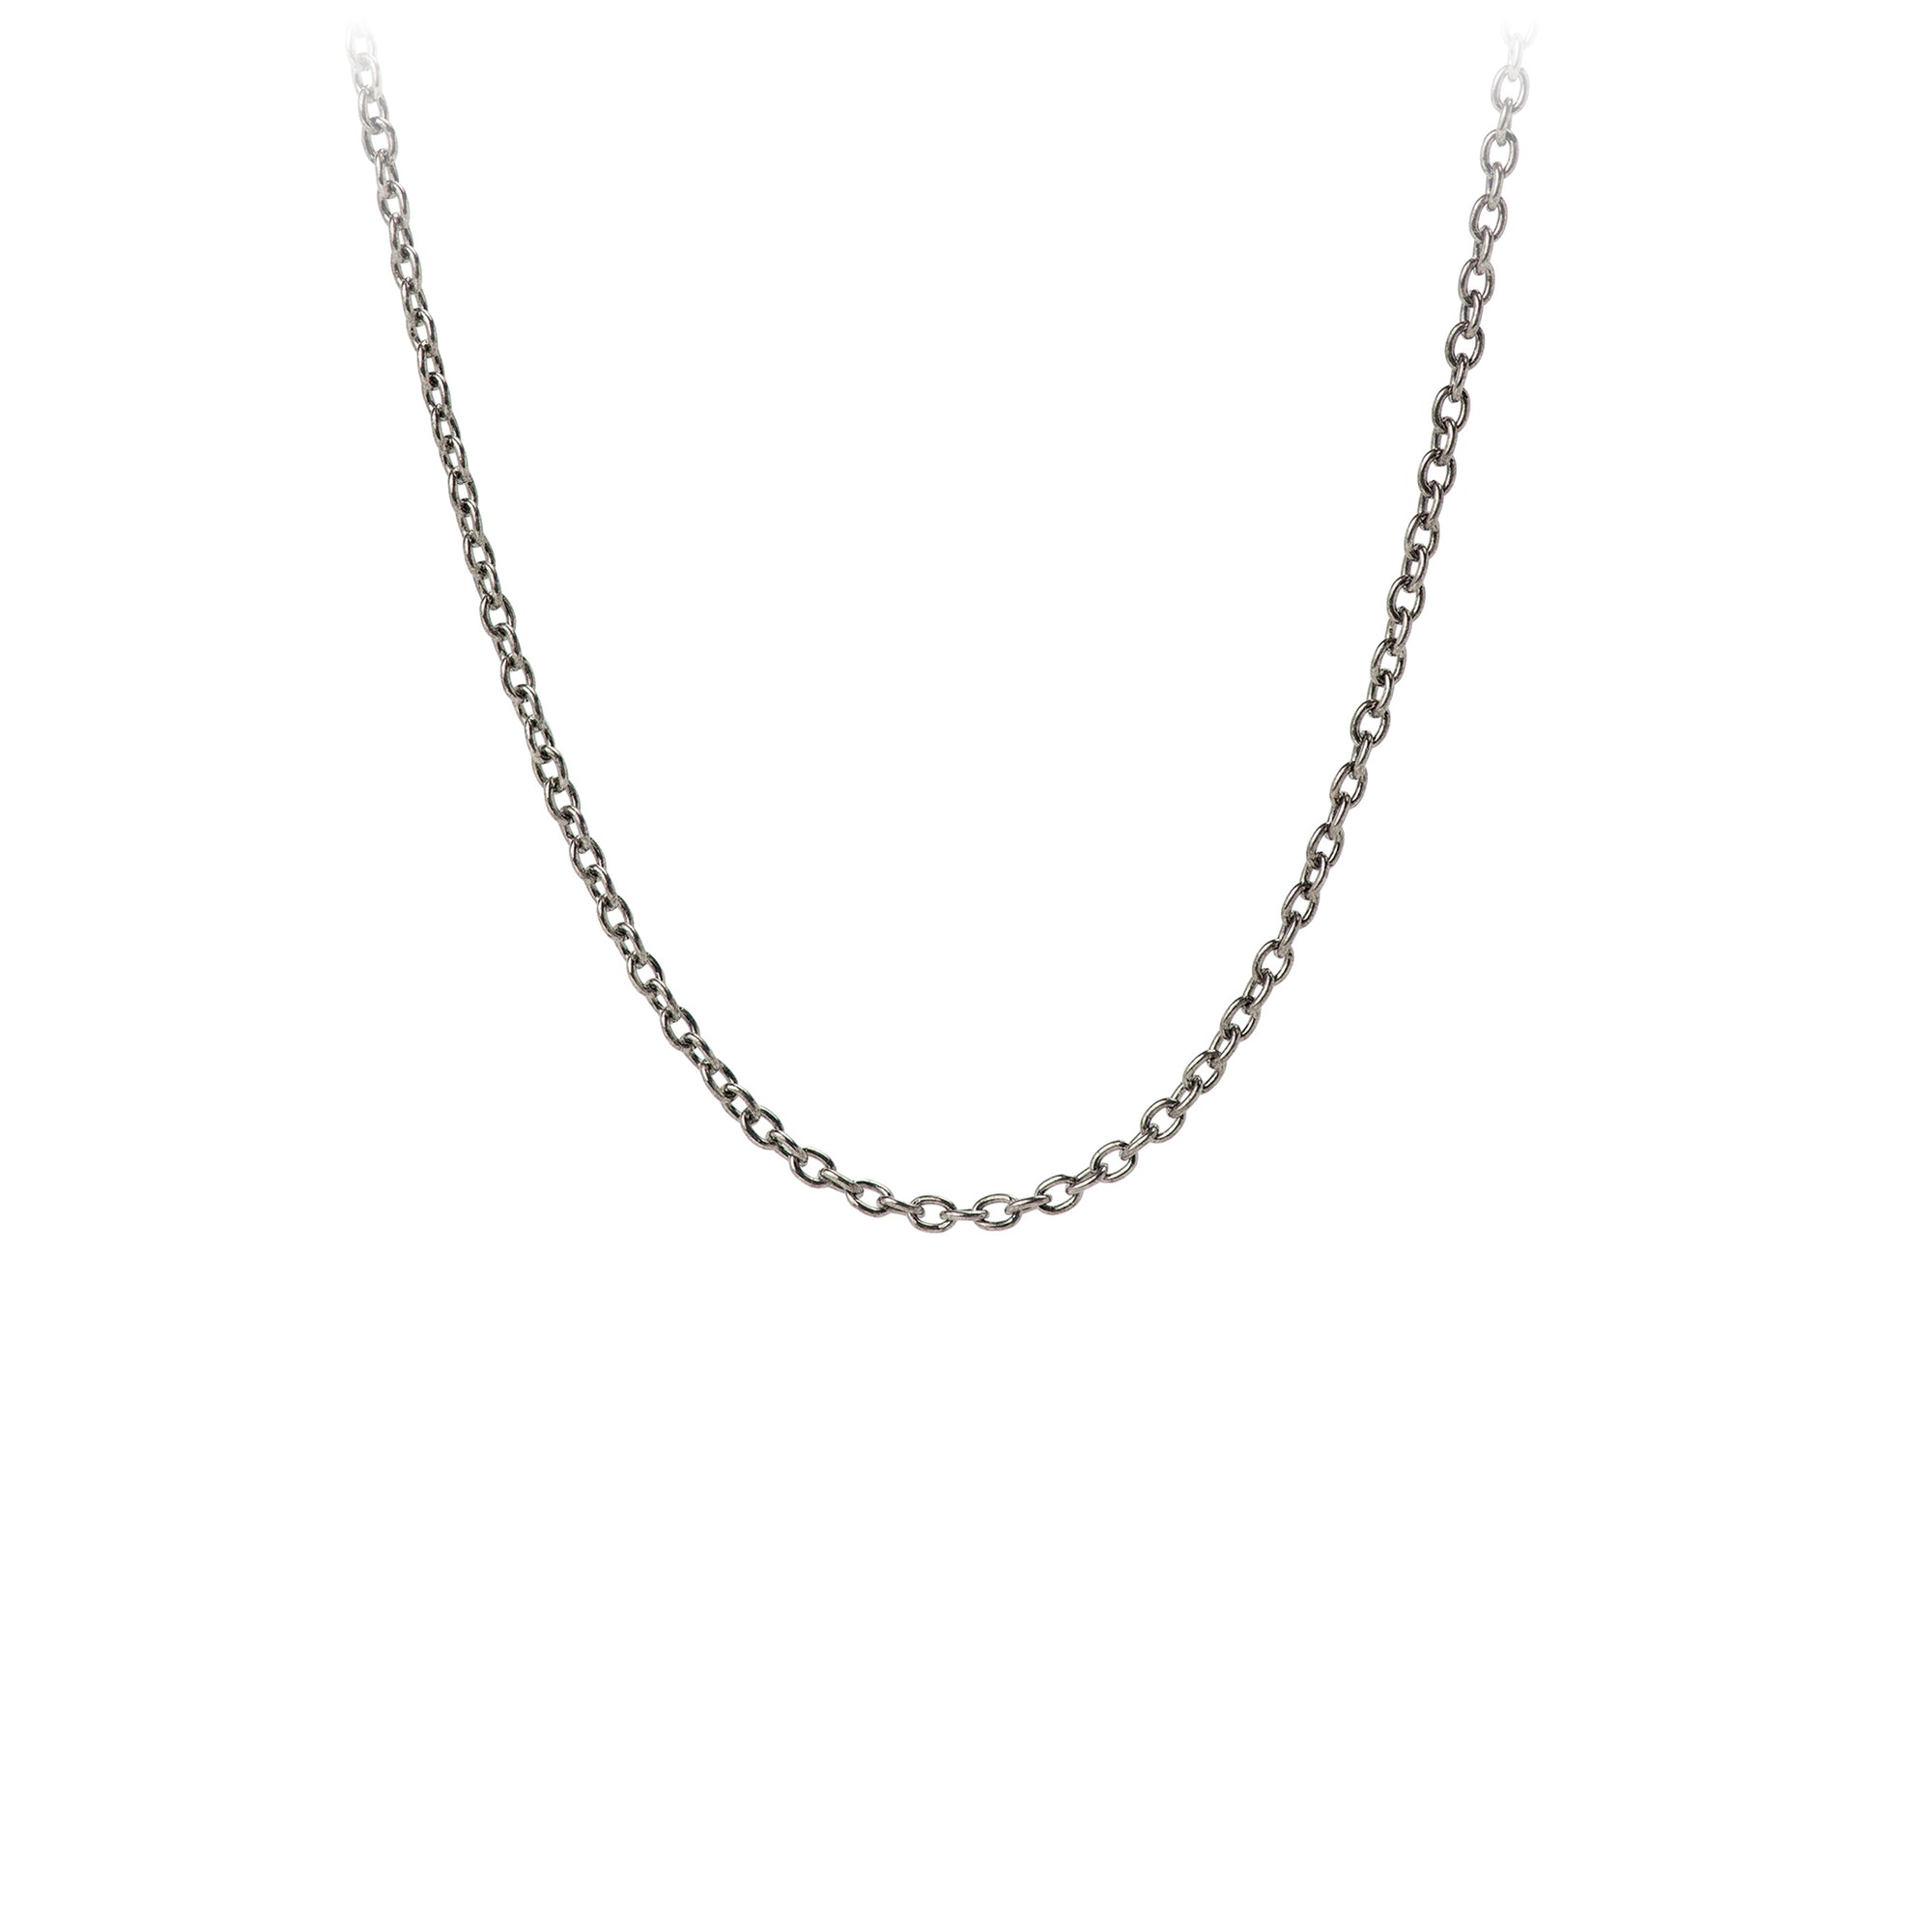 A sterling silver chain with medium oxidized cable links